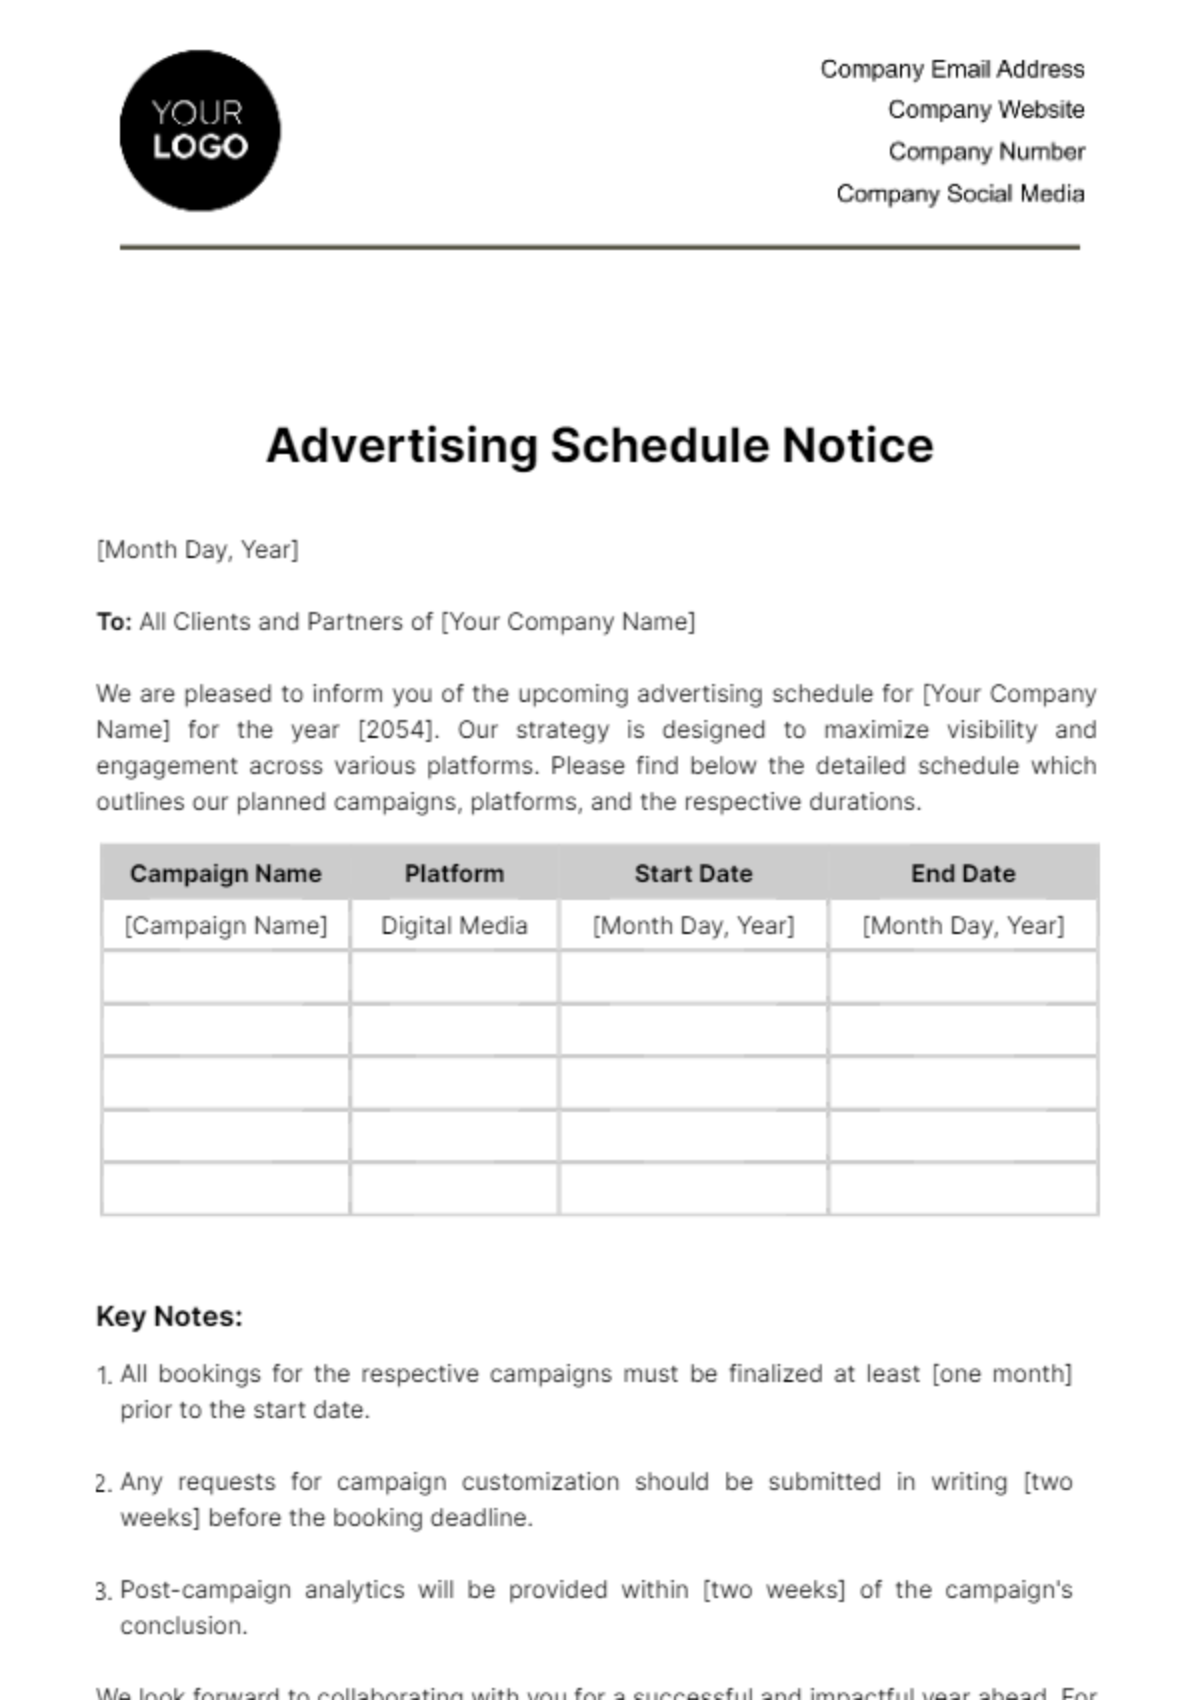 Free Advertising Schedule Notice Template